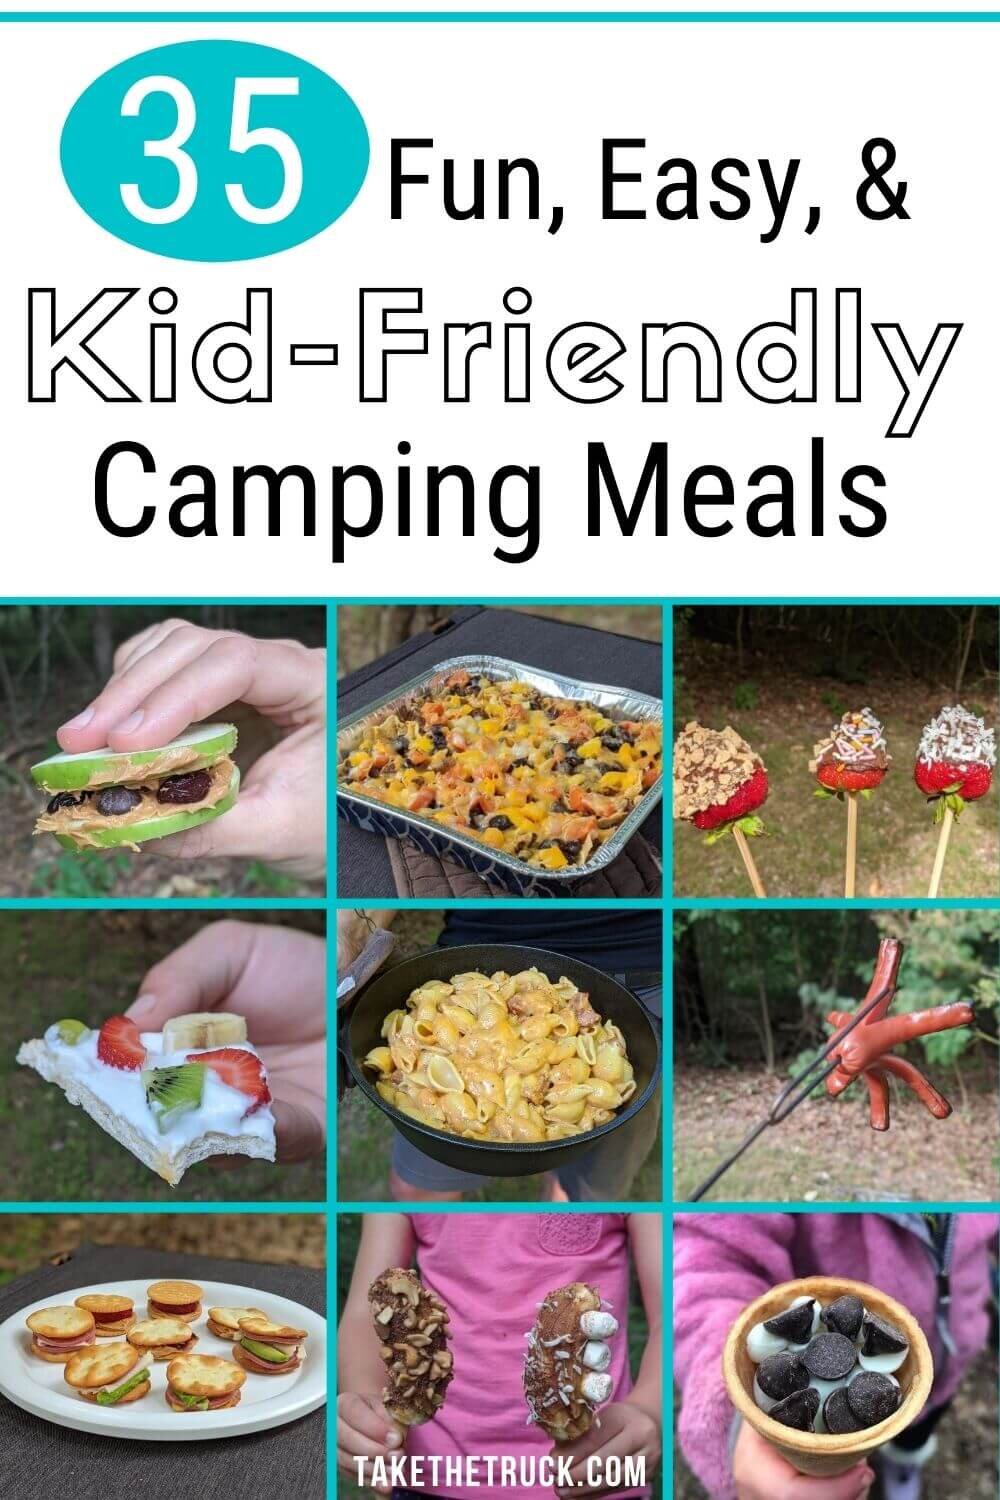 These 35 camping meals for kids are organized into camping breakfasts, lunches, dinners, plus healthy camping snacks and fun kid friendly desserts. Tons of fun camping food ideas for kids!